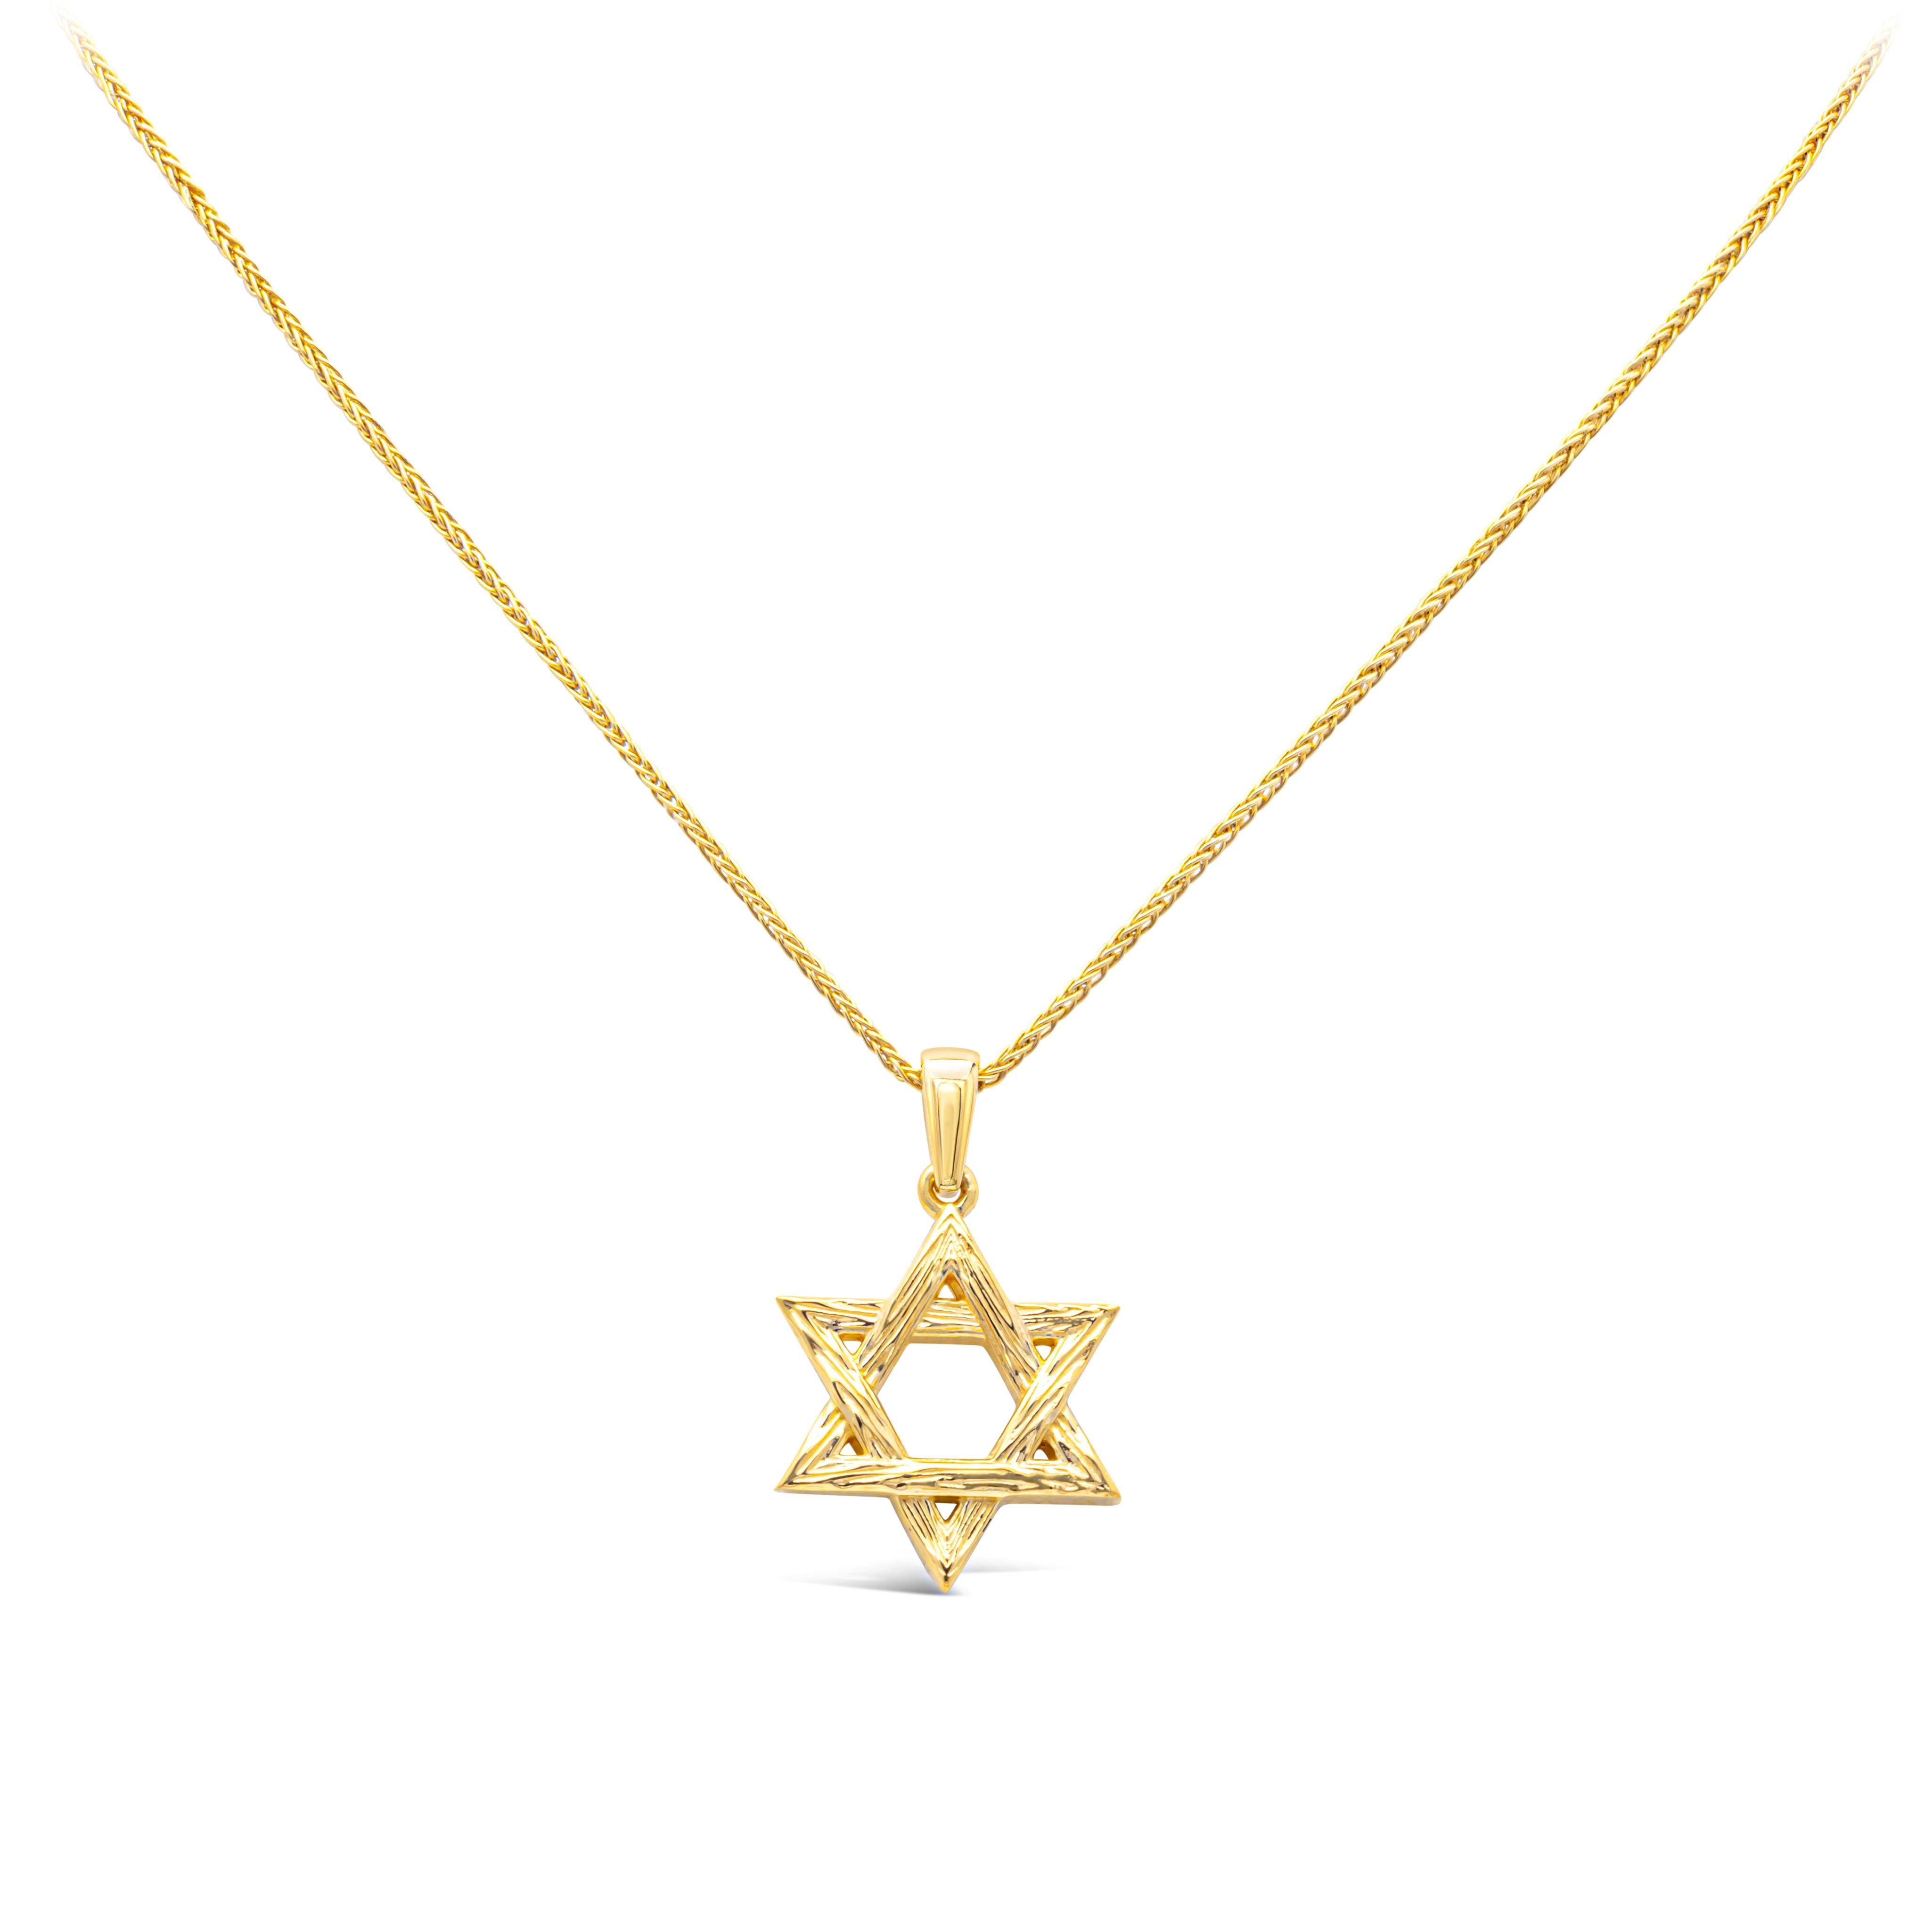 Showcasing an 18k yellow gold traditional religious star of David pendant necklace, suspended on an adjustable yellow gold wheat chain.

Style available in different price ranges. Prices are based on your selection. Please contact us for more